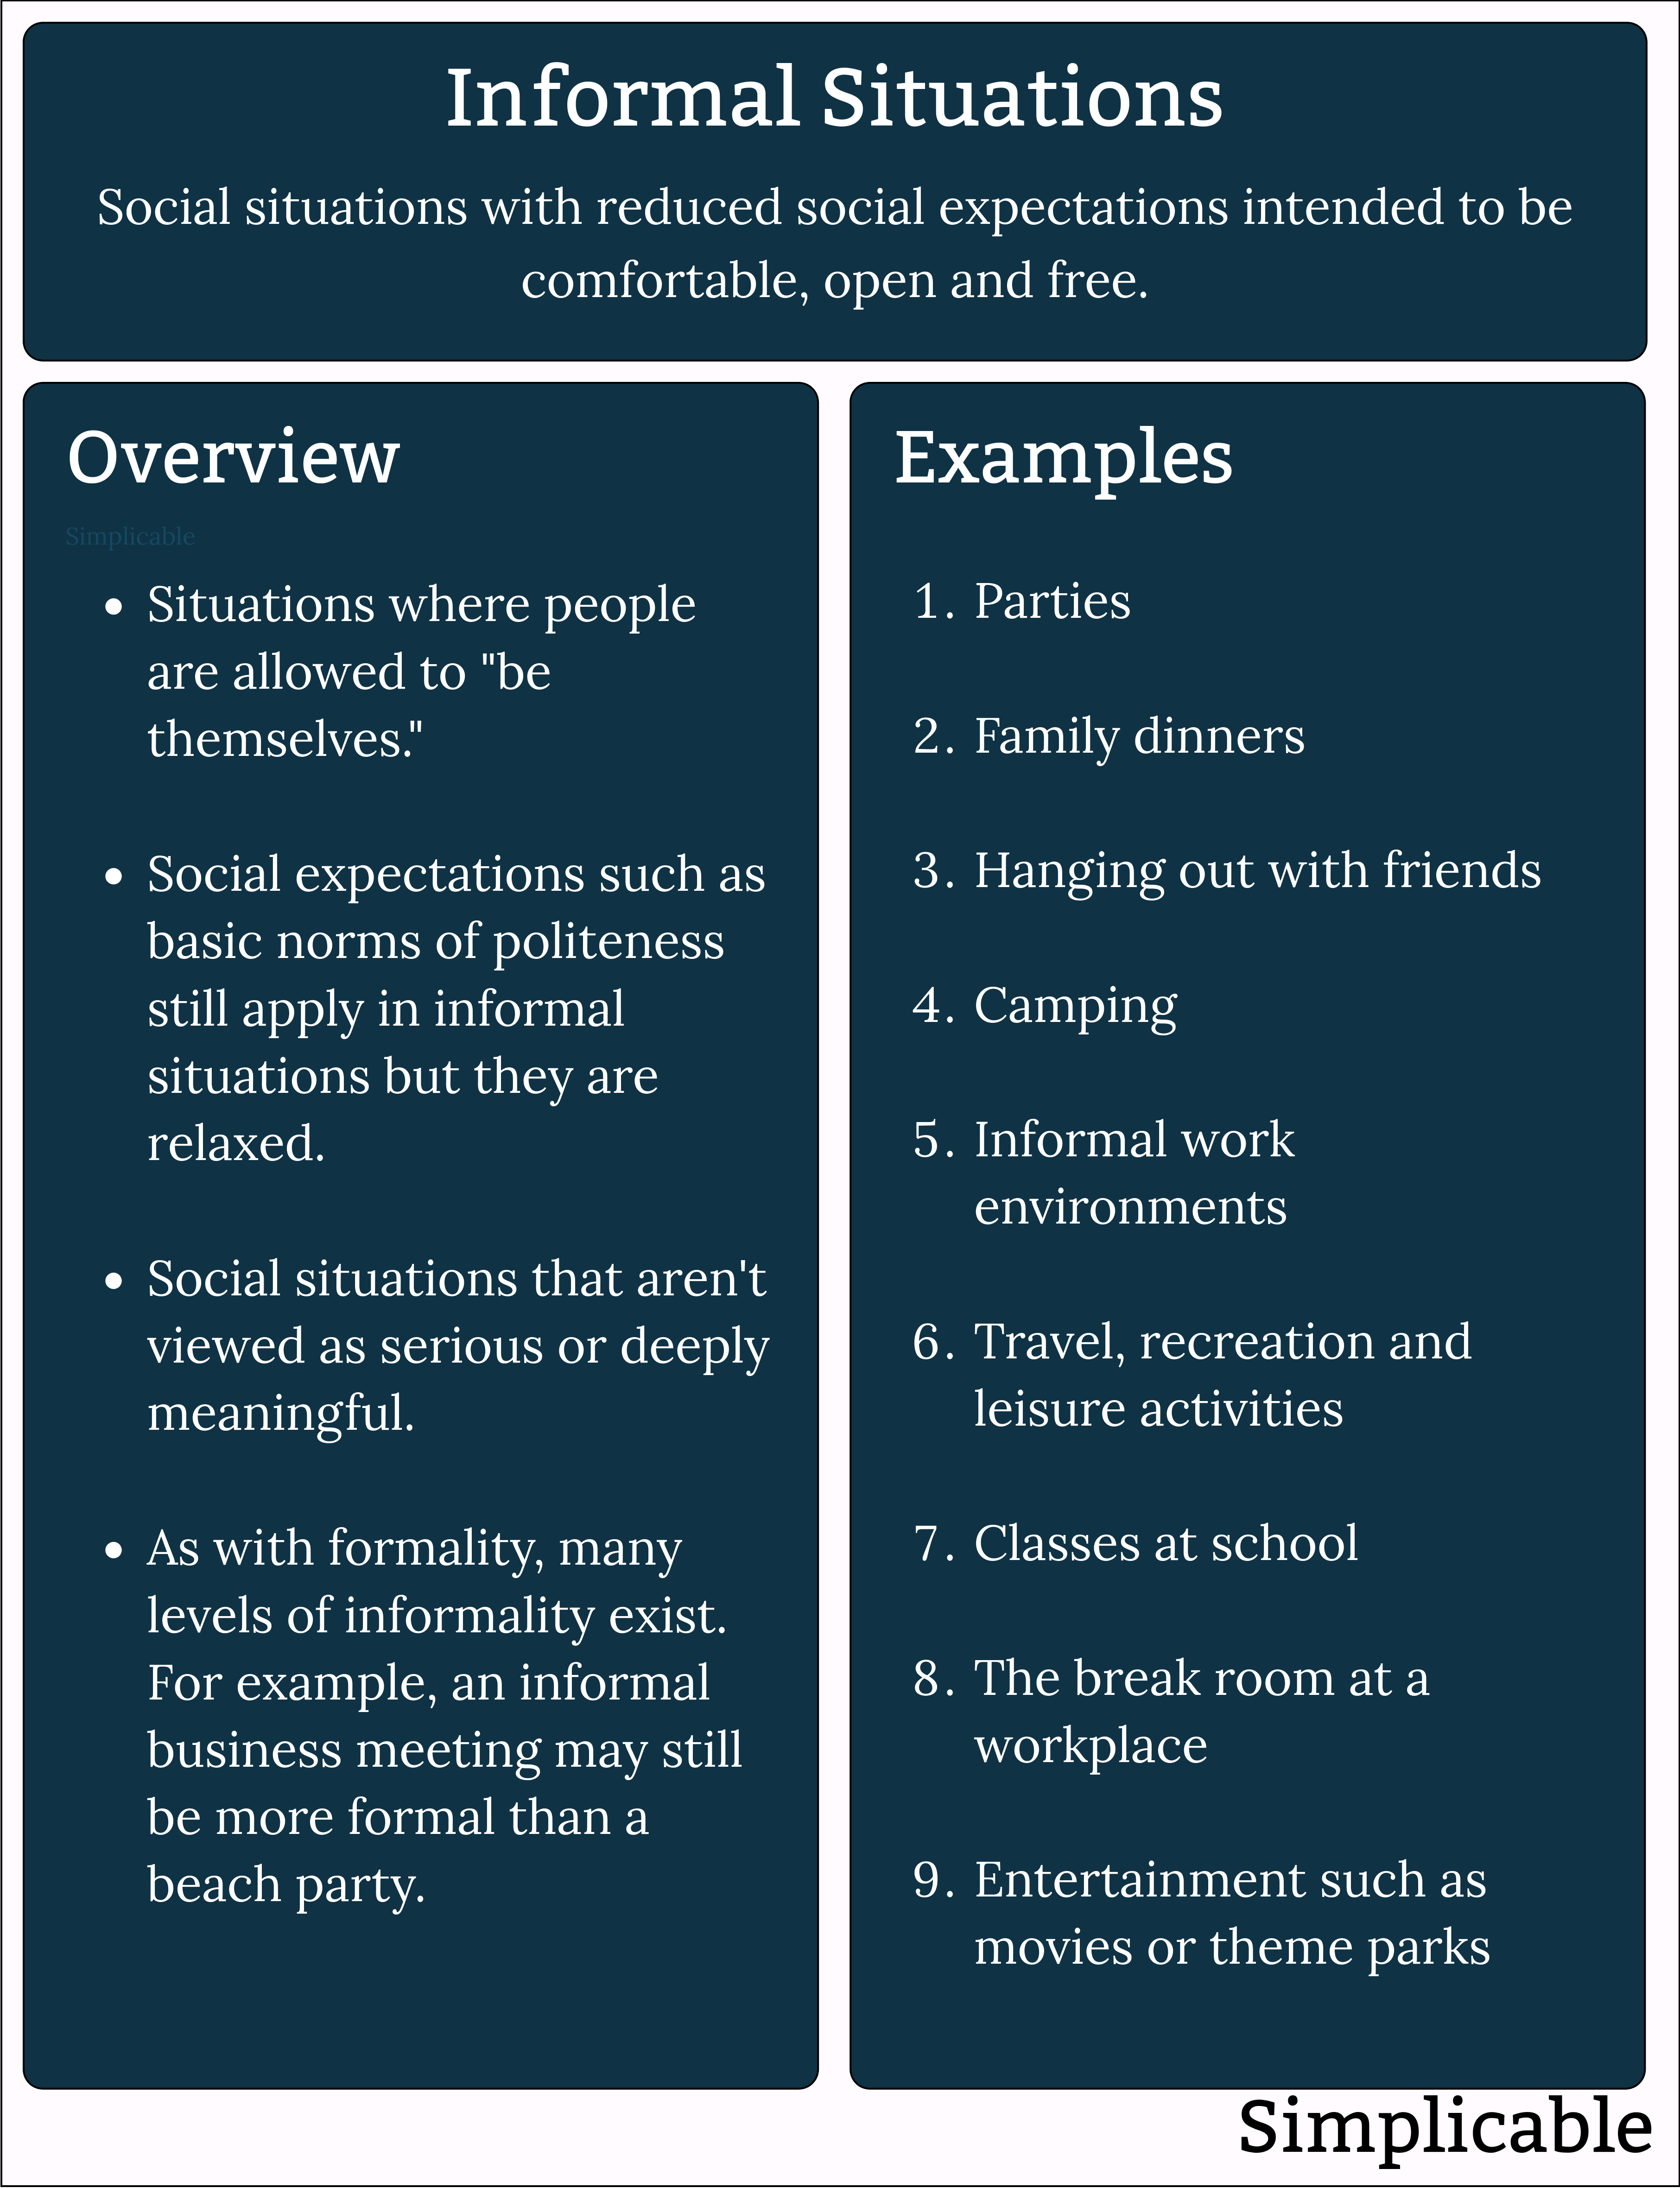 informal situations overview and examples